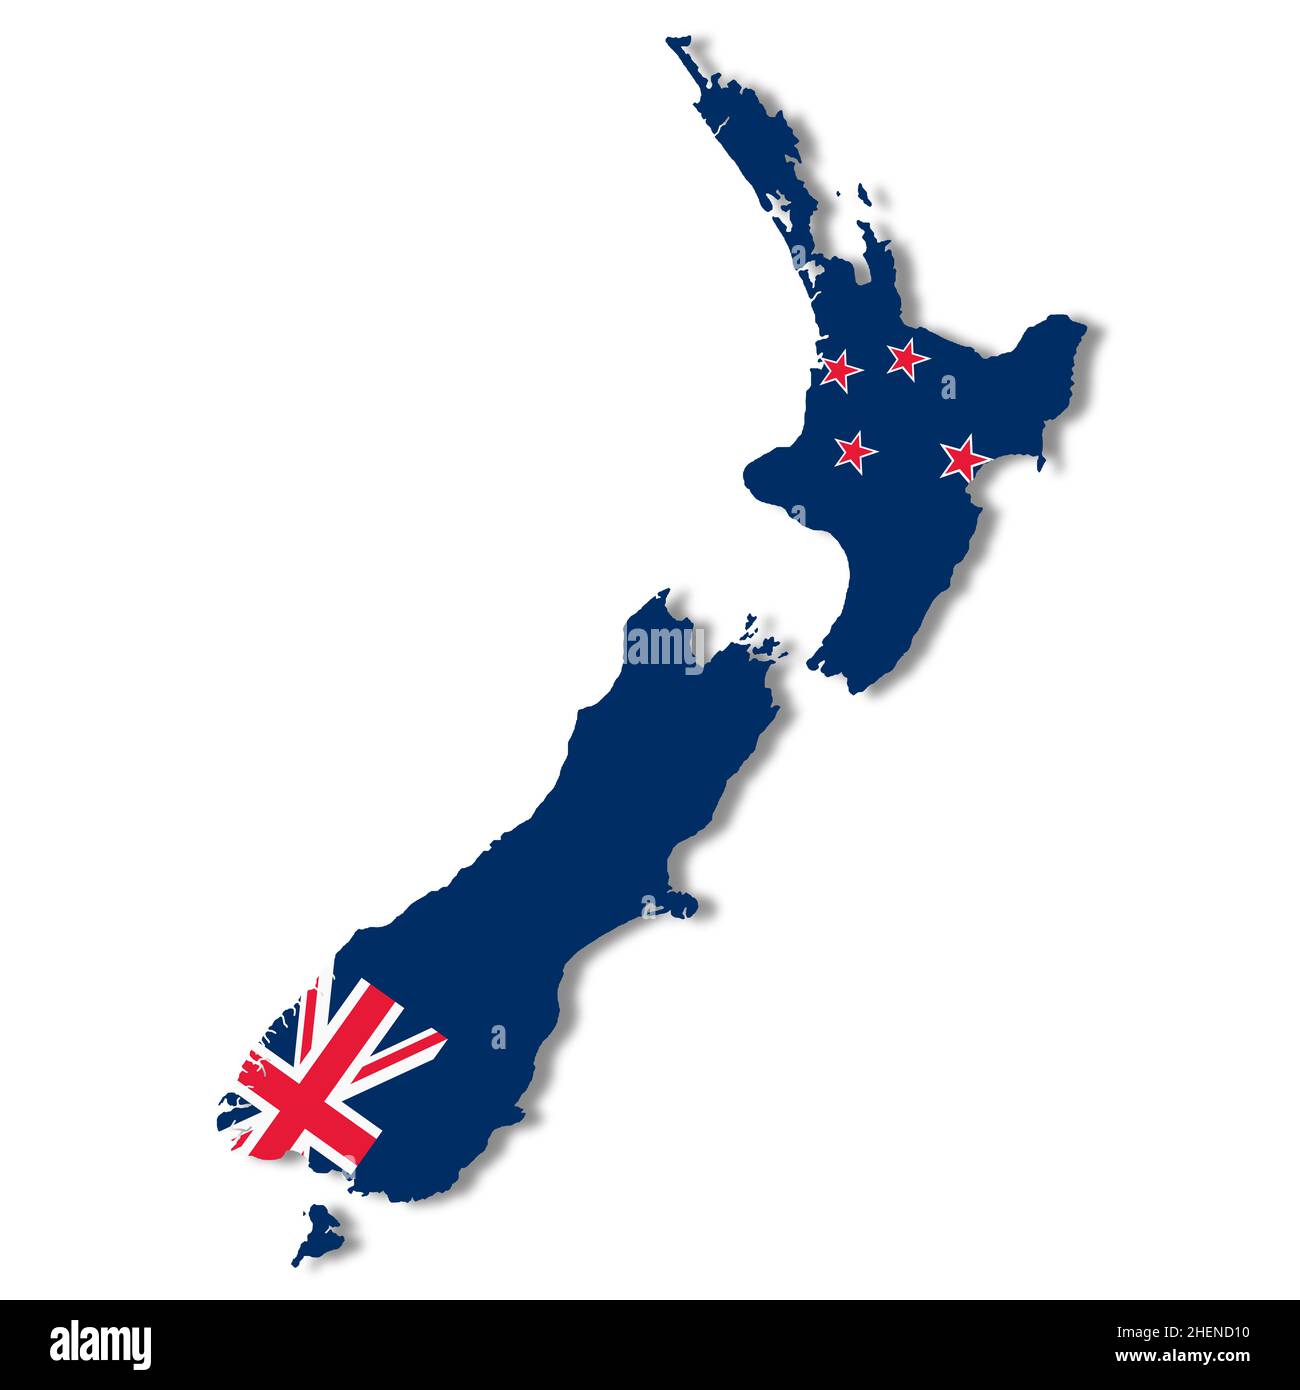 New Zealand map on white background with clipping path 3d illustration Stock Photo